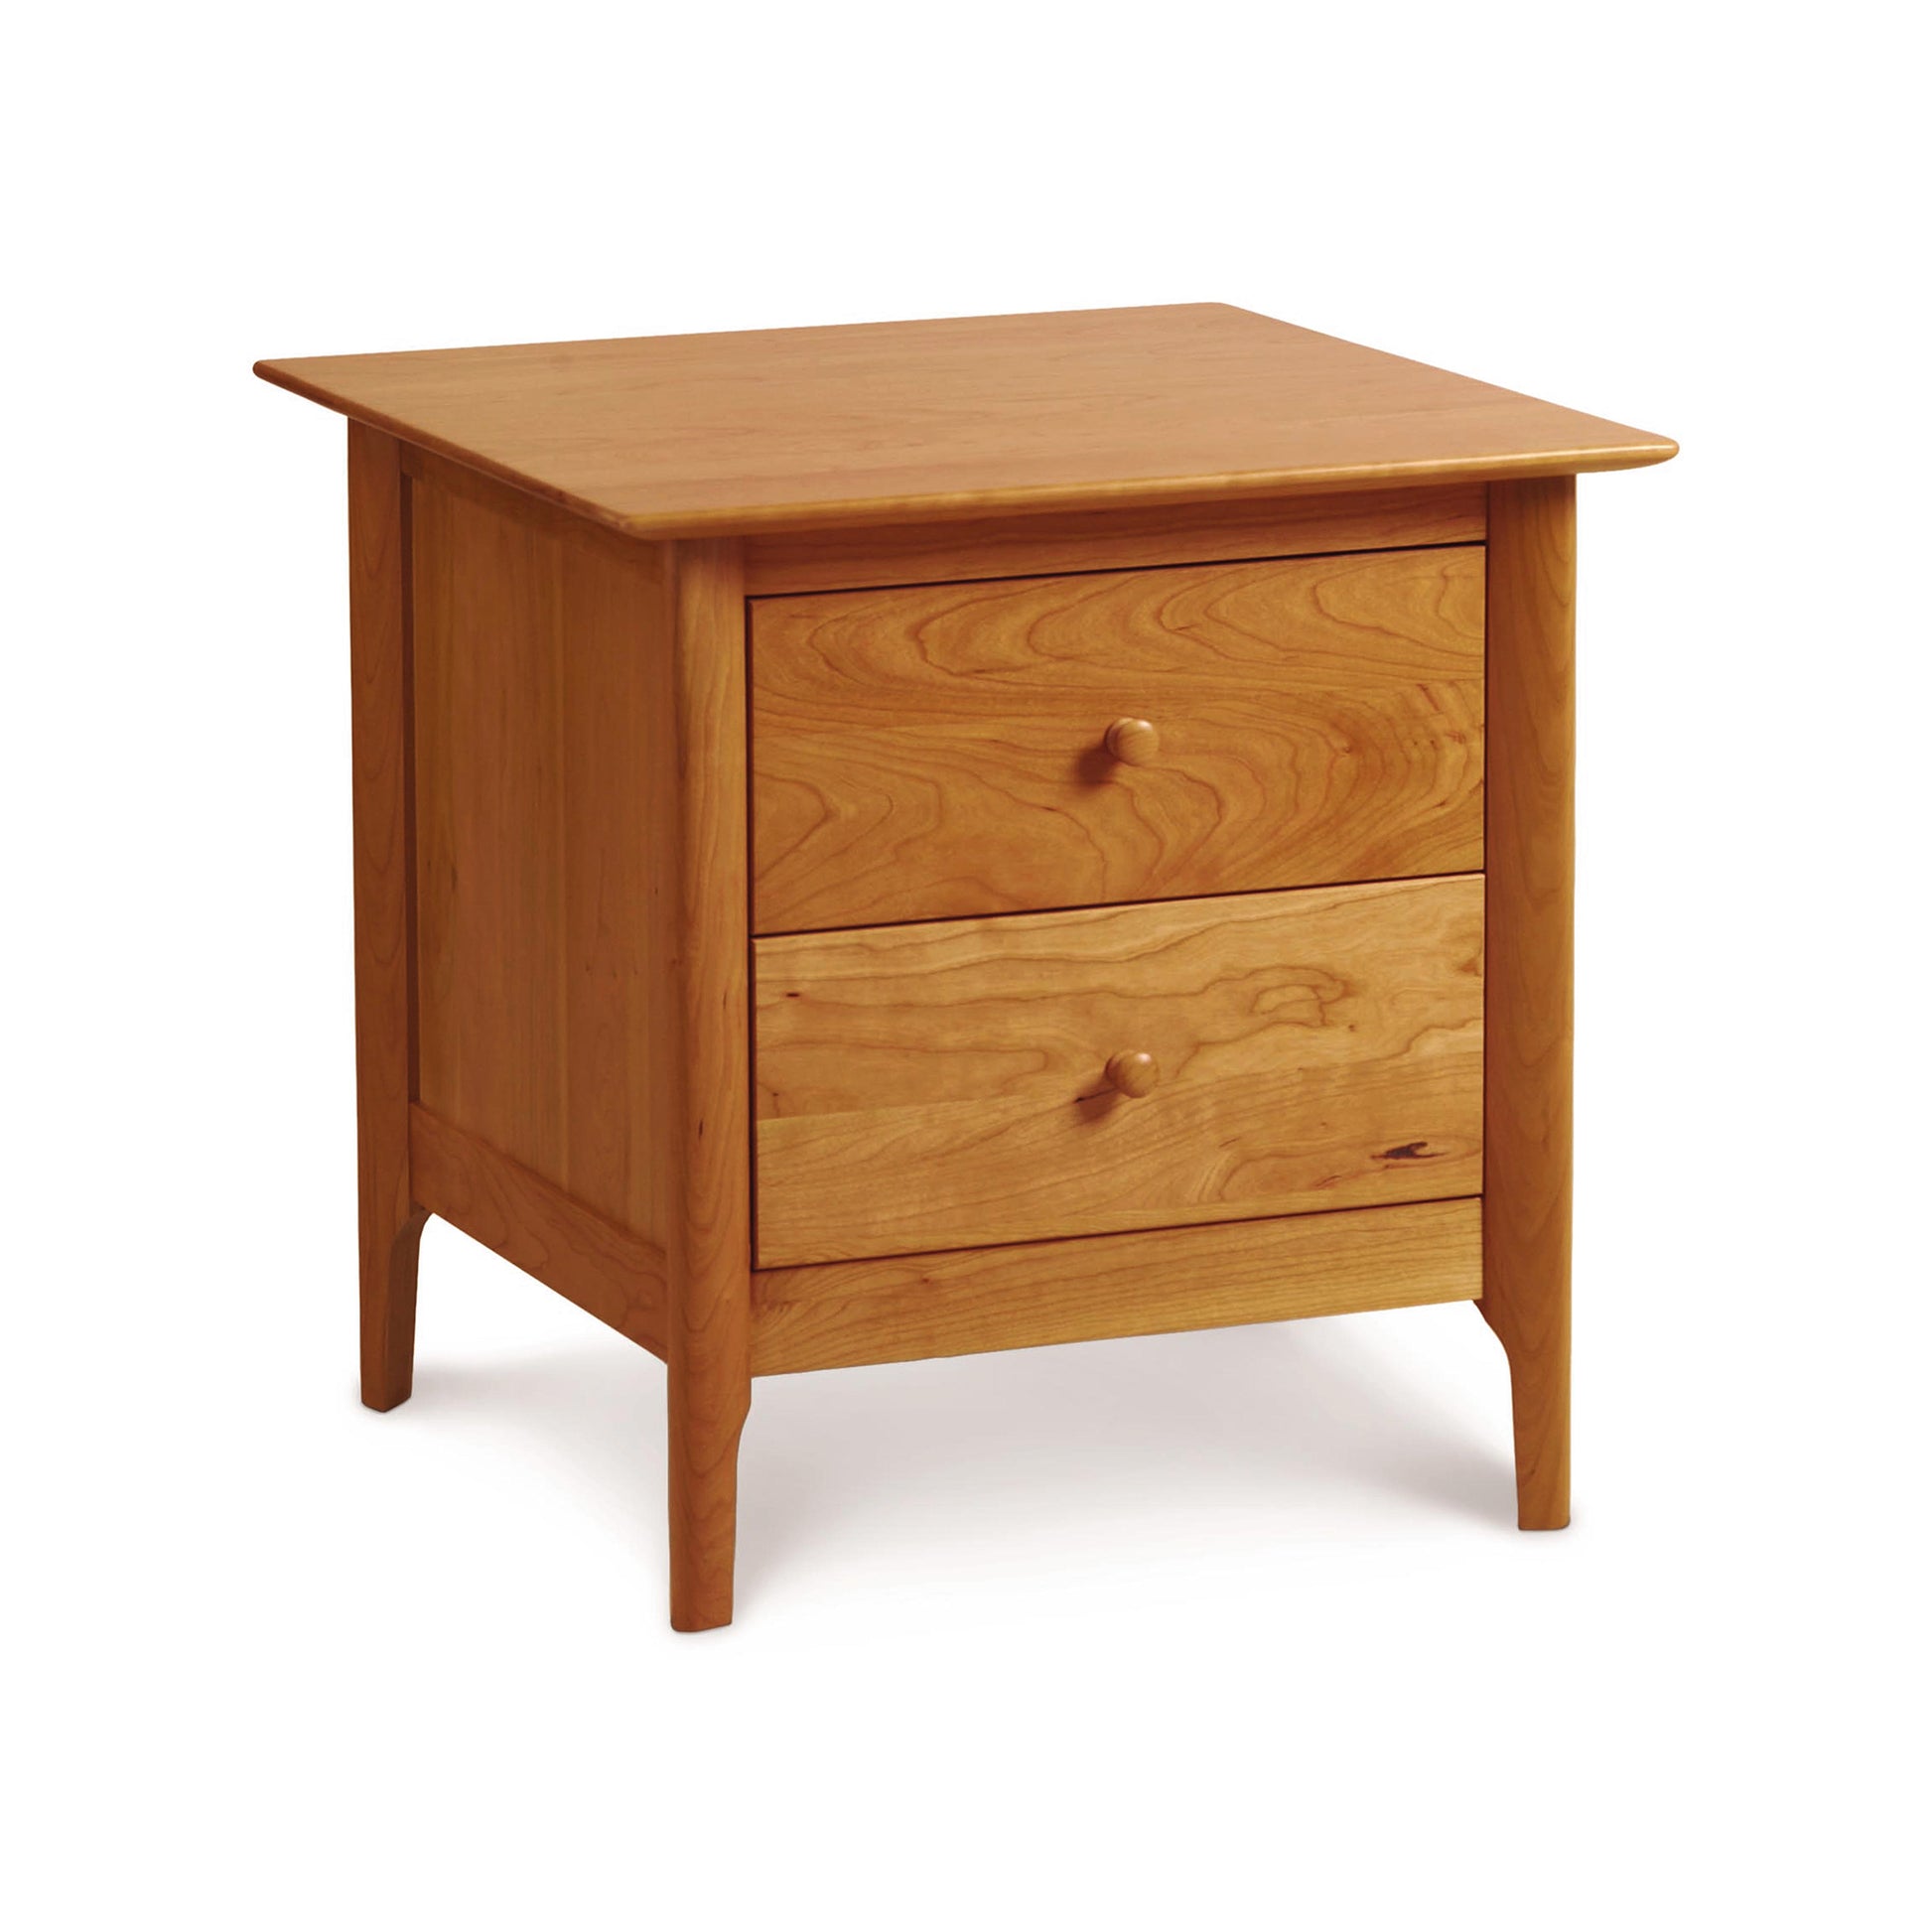 The Copeland Furniture Sarah 2-Drawer Nightstand is a small wooden nightstand handmade in Vermont.